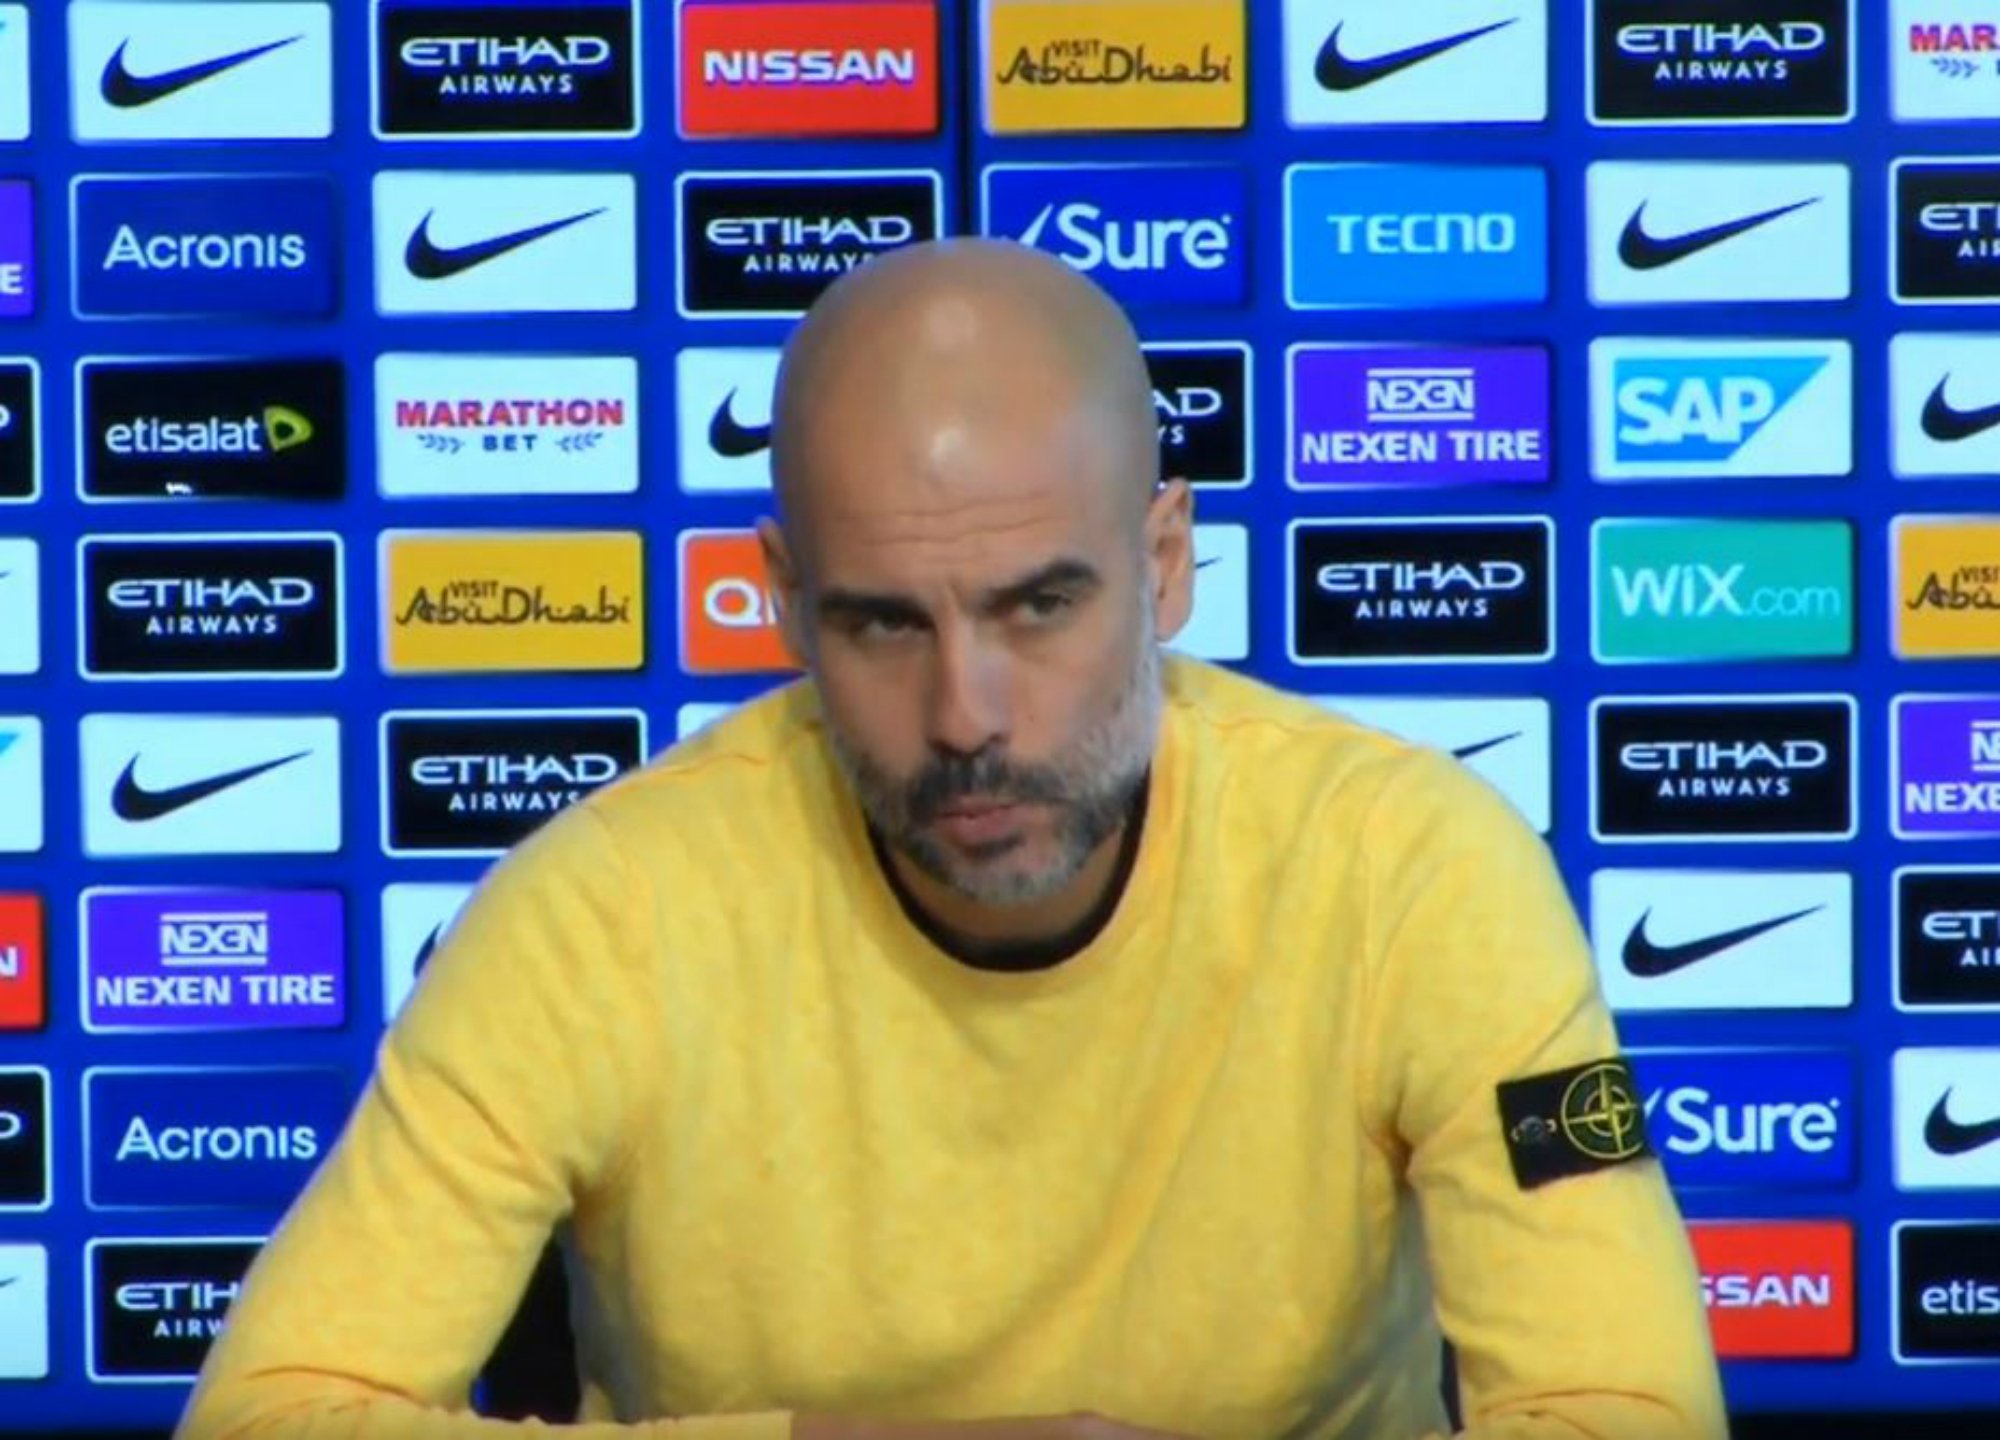 Pep Guardiola on Catalan independence leaders: "They've accused them of crimes they didn't commit"